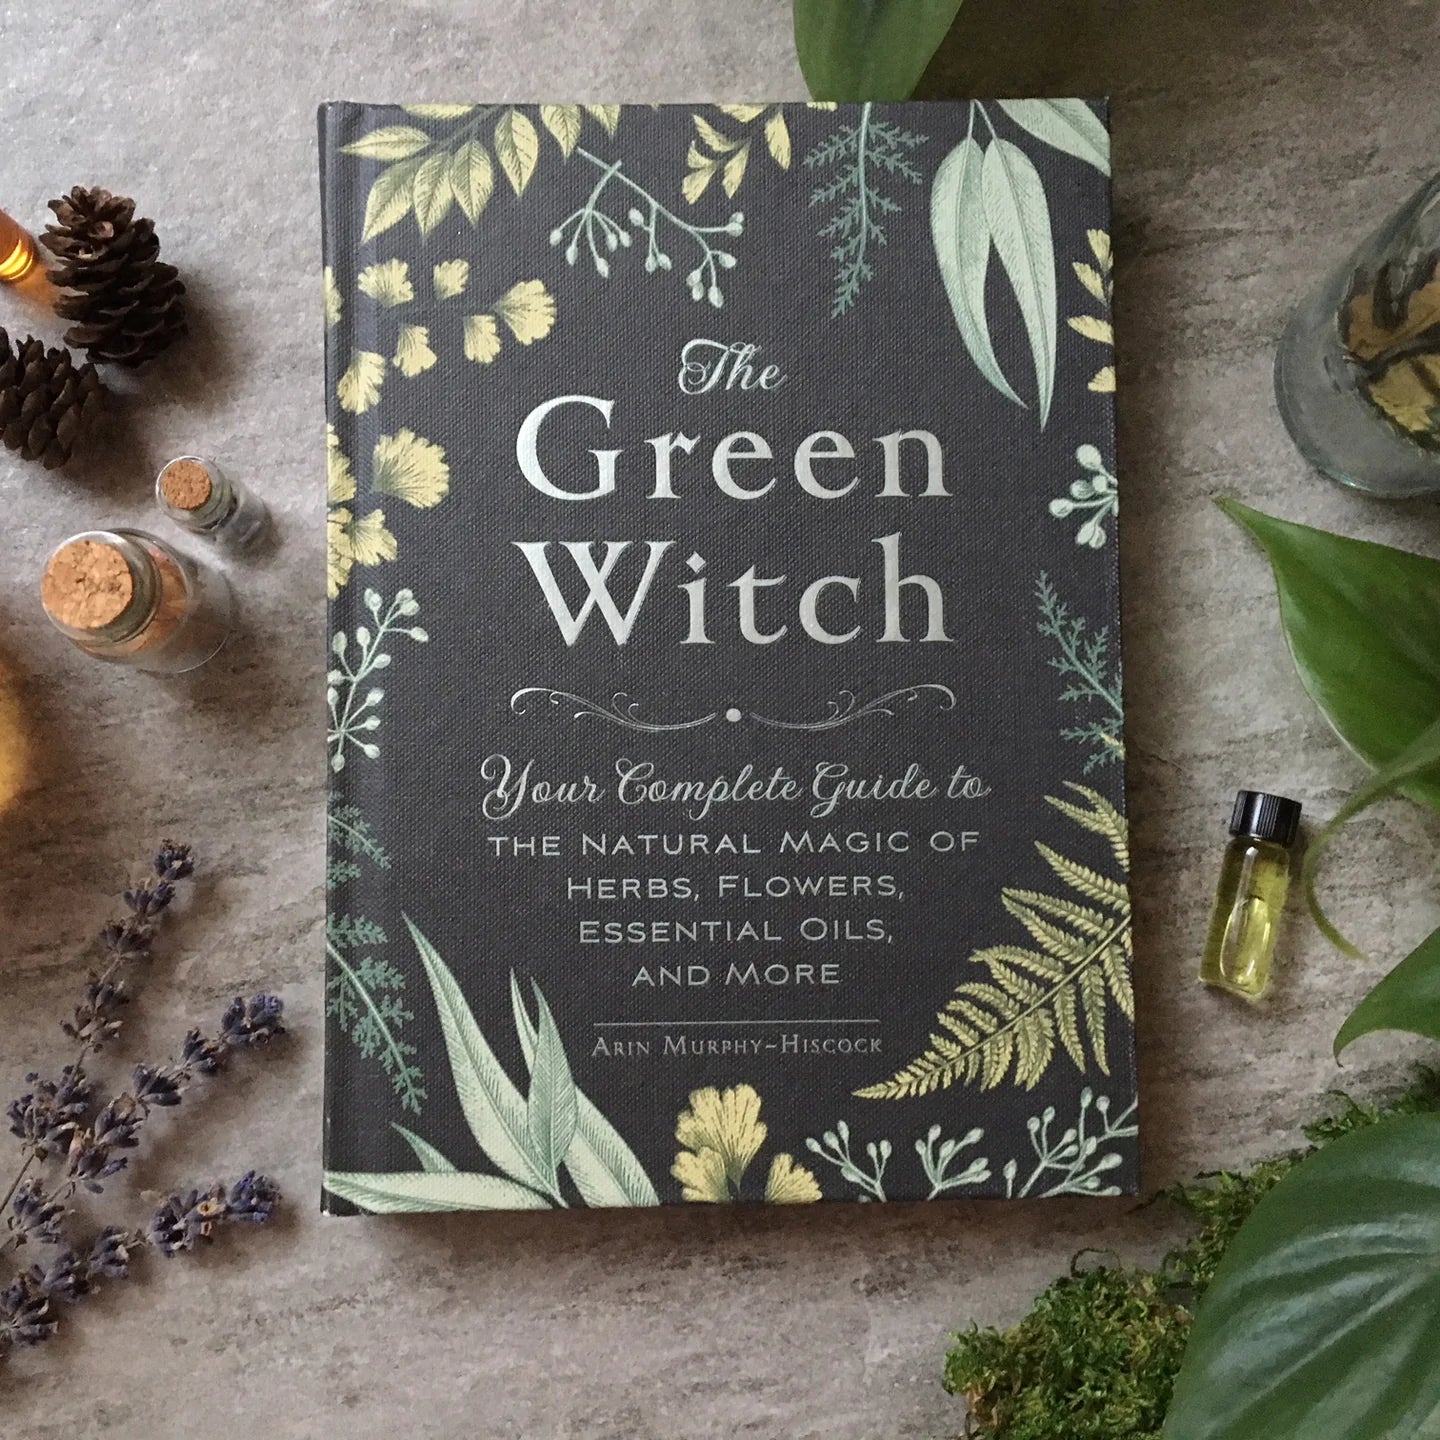 The Green Witch: Your Complete Guide